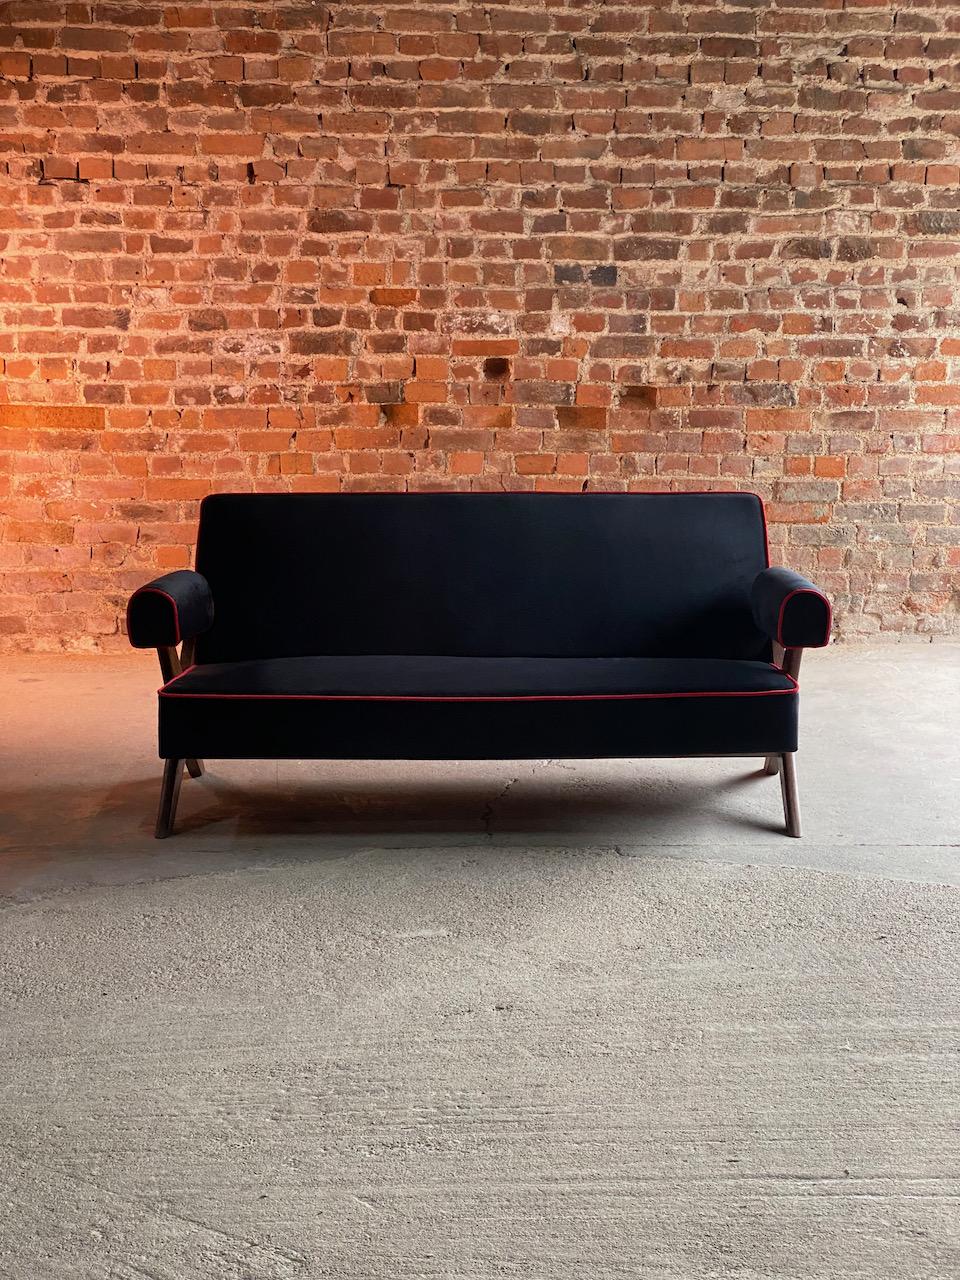 Pierre Jeanneret PJ-010806 ‘Easy Lounge’ Sofa Circa 1958-59 In Excellent Condition For Sale In Longdon, Tewkesbury